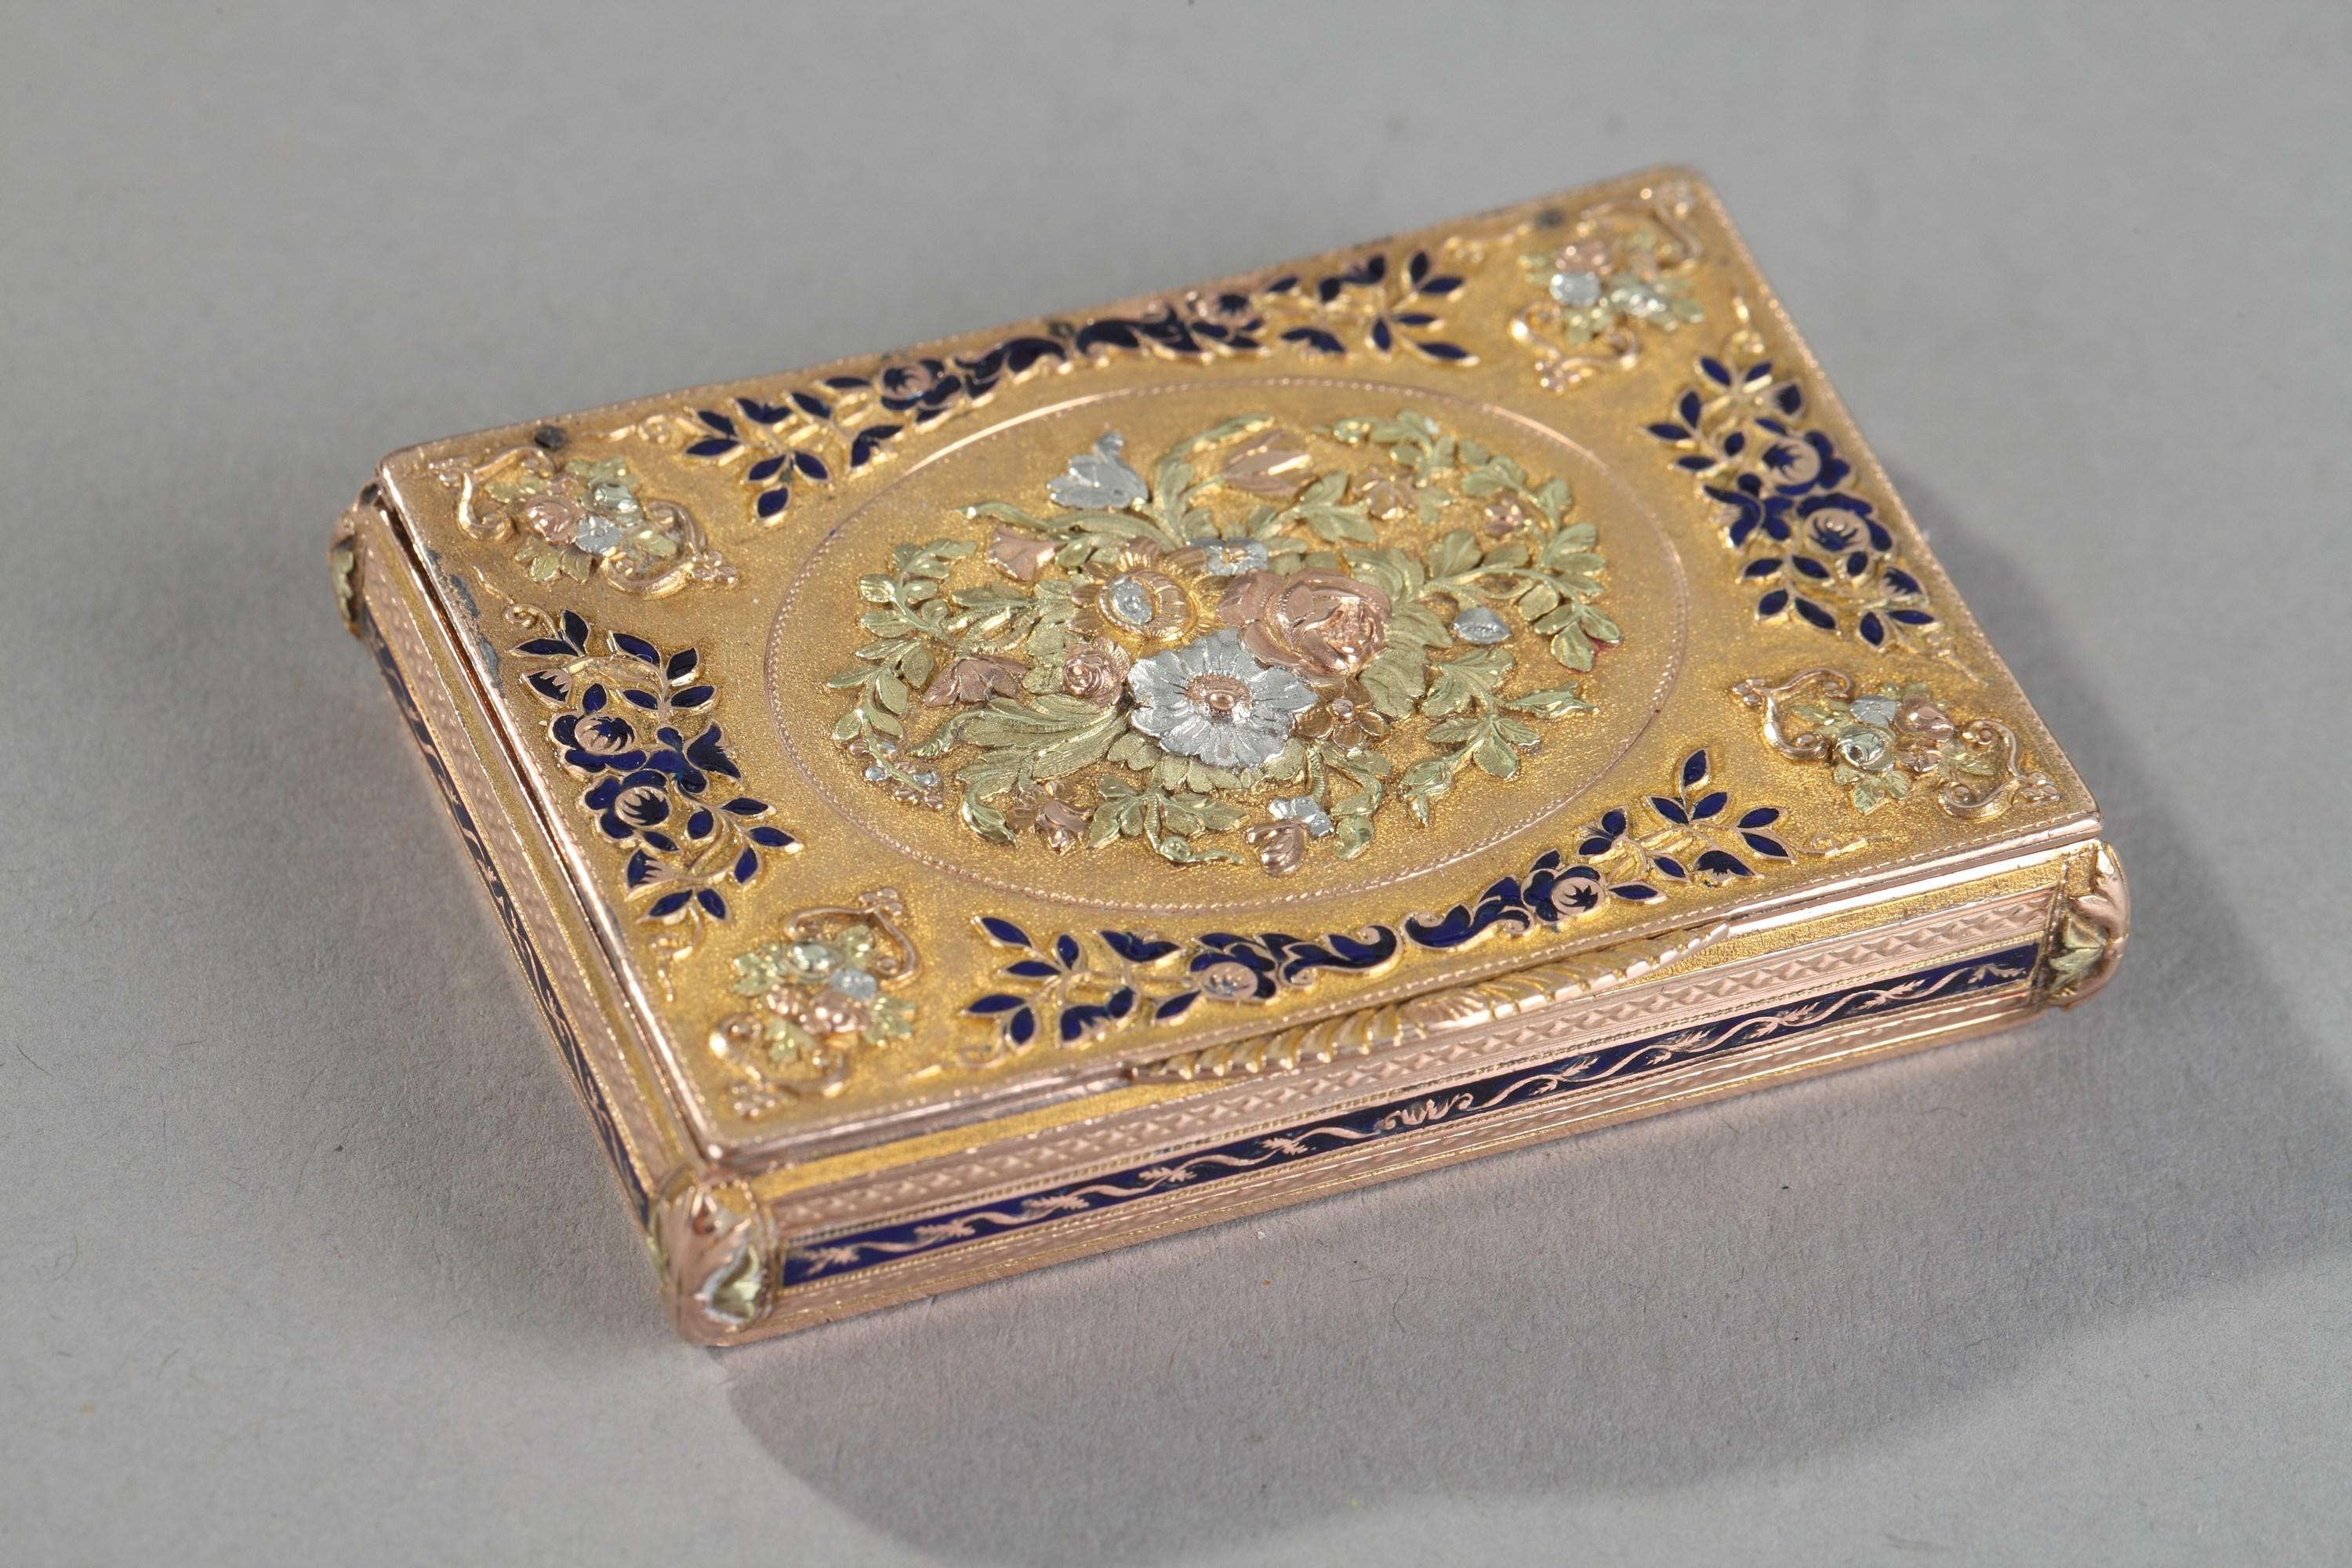 Rectangular box with three tones of gold and royal blue enamel. The hinged lid is embellished with a multicolored gold medallion in relief featuring a bouquet of roses and tulips, set on a matte gold background. Delicate foliage accented with royal